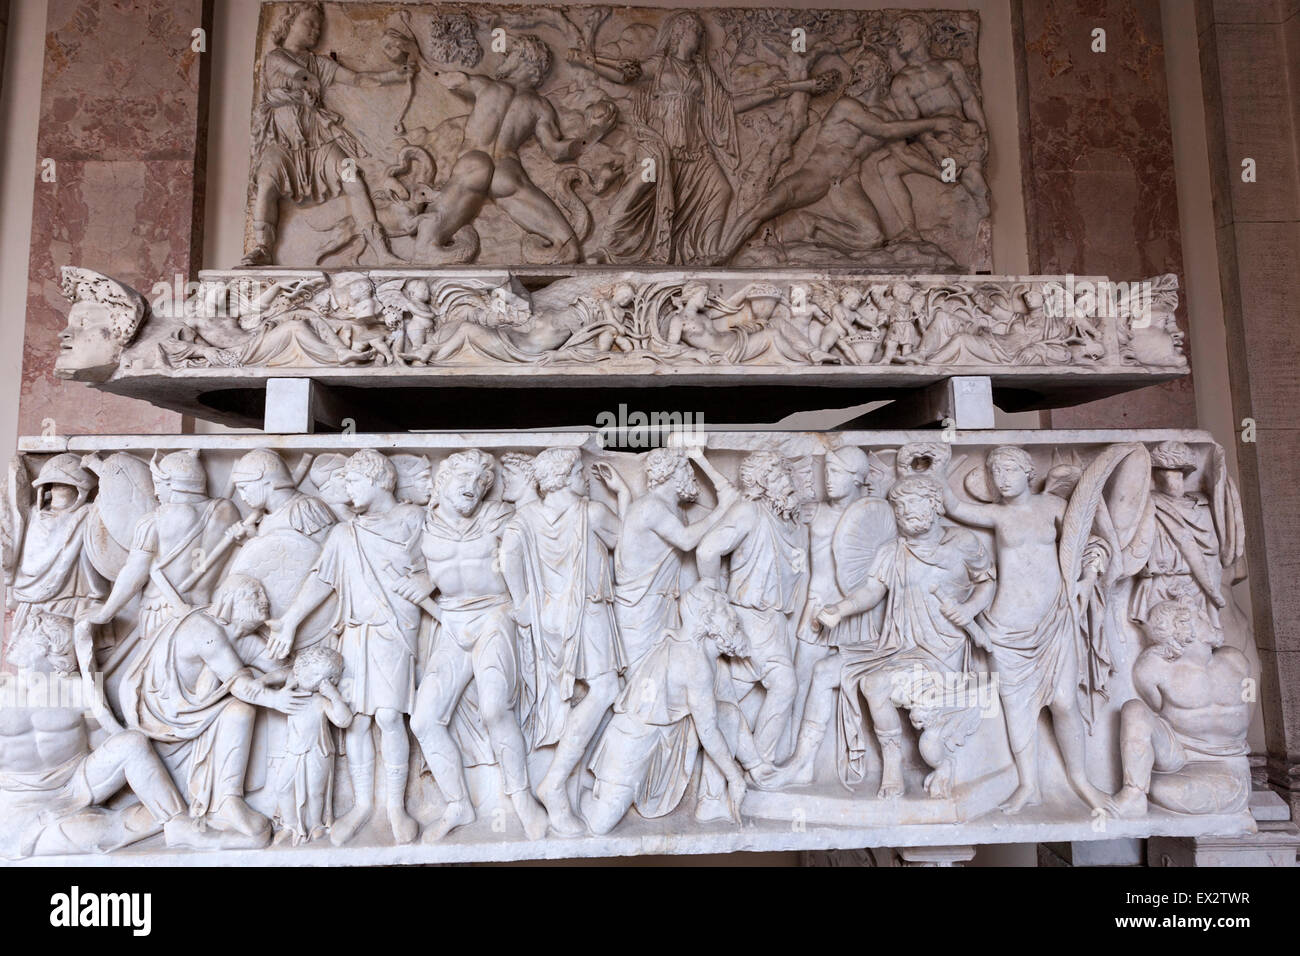 Roman Sarcophagus in Museo Pio-Clementino, Vatican Museums, Musei Vaticani, Vatican City. Stock Photo